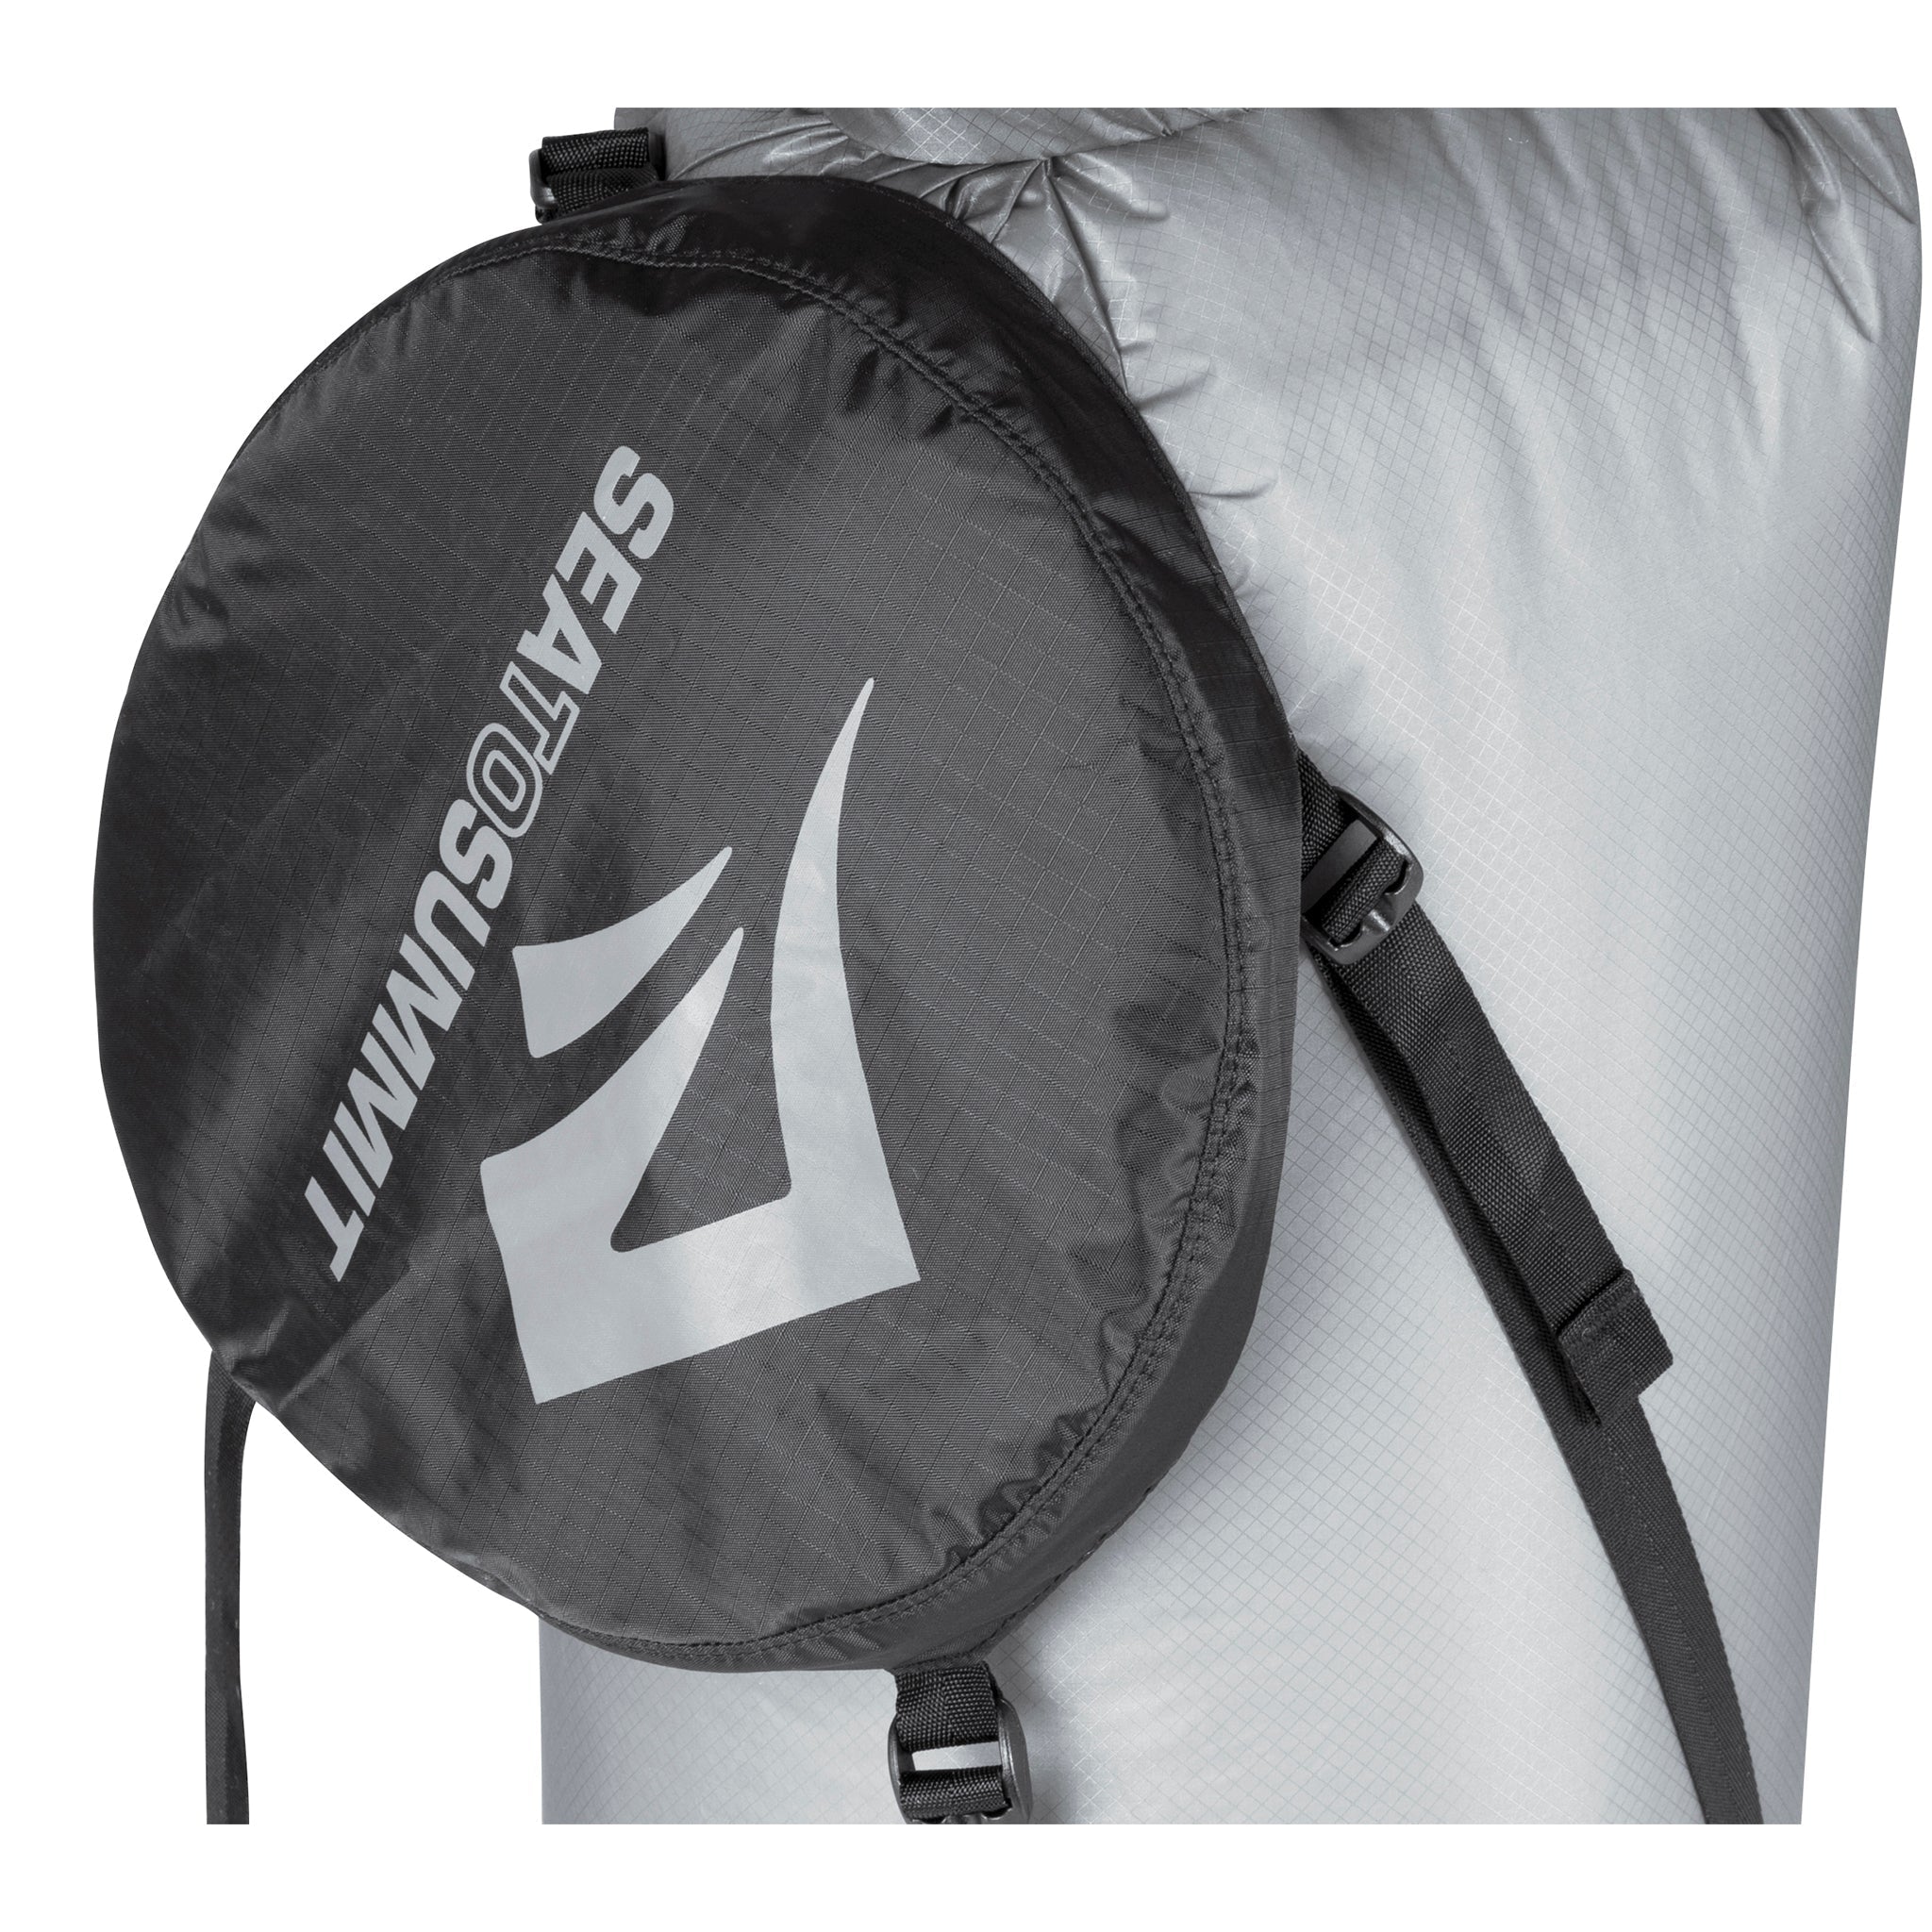 Ultra-Sil Compression Dry Sack